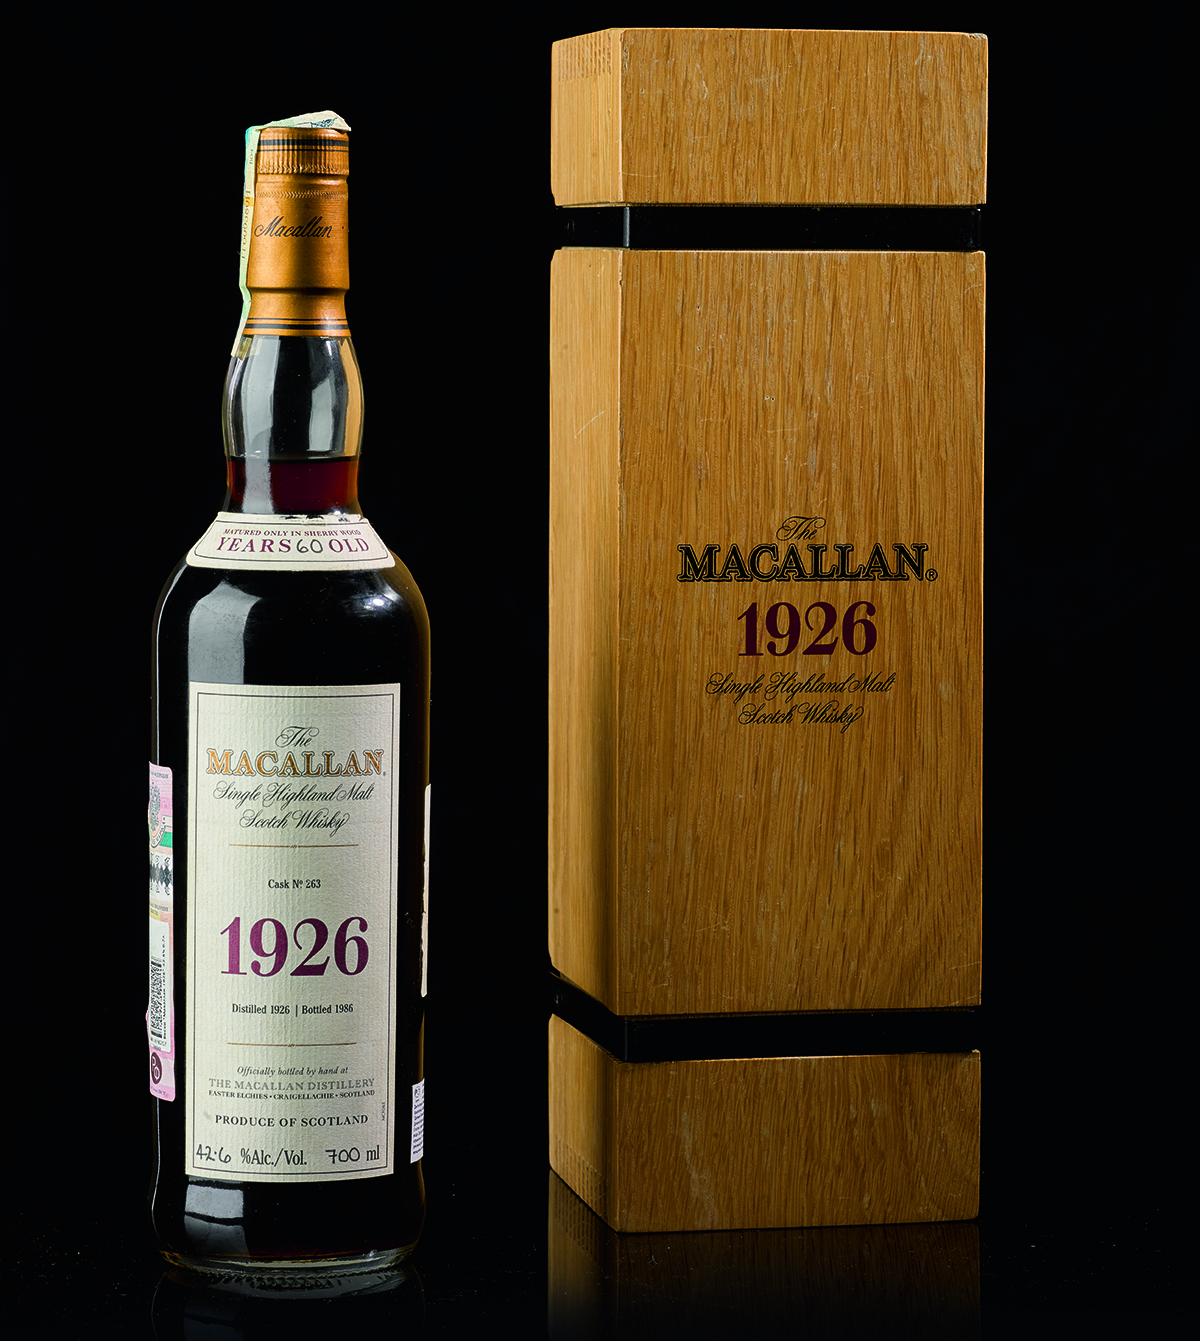 The record-setting Macallan Fine and Rare Series 1926 whisky. Image courtesy Sotheby's.